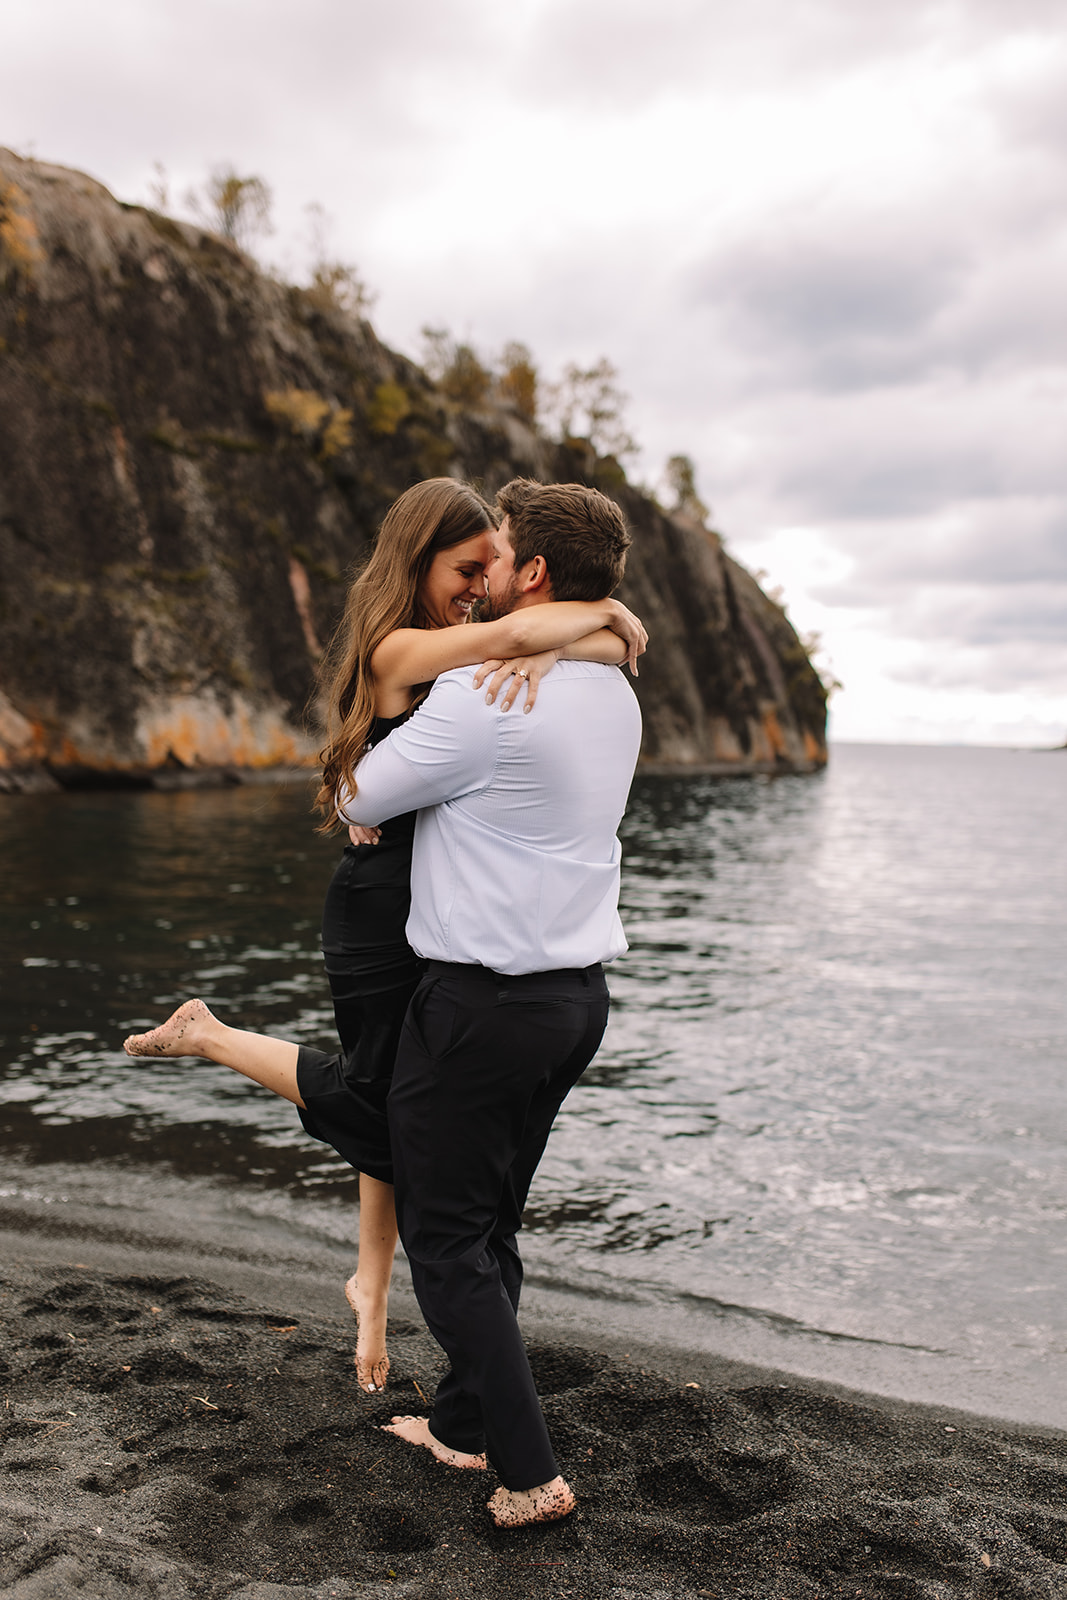 A guy picking up his girl with her arms around his neck and her leg kicked up, while they spin around on the black sand beach in Minnesota